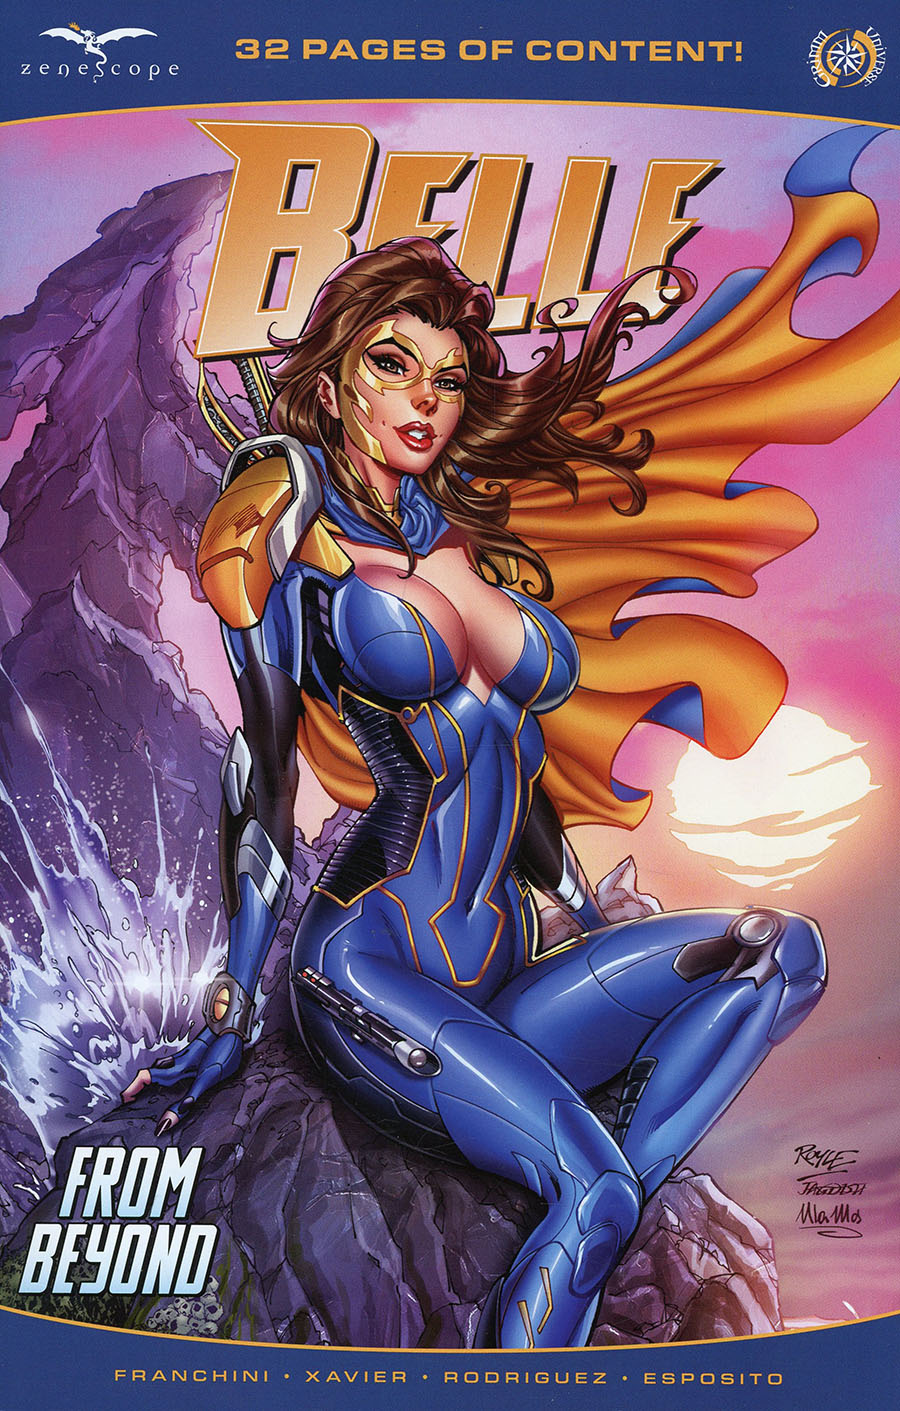 Grimm Fairy Tales Presents Belle From Beyond #1 (One Shot) Cover C John Royle